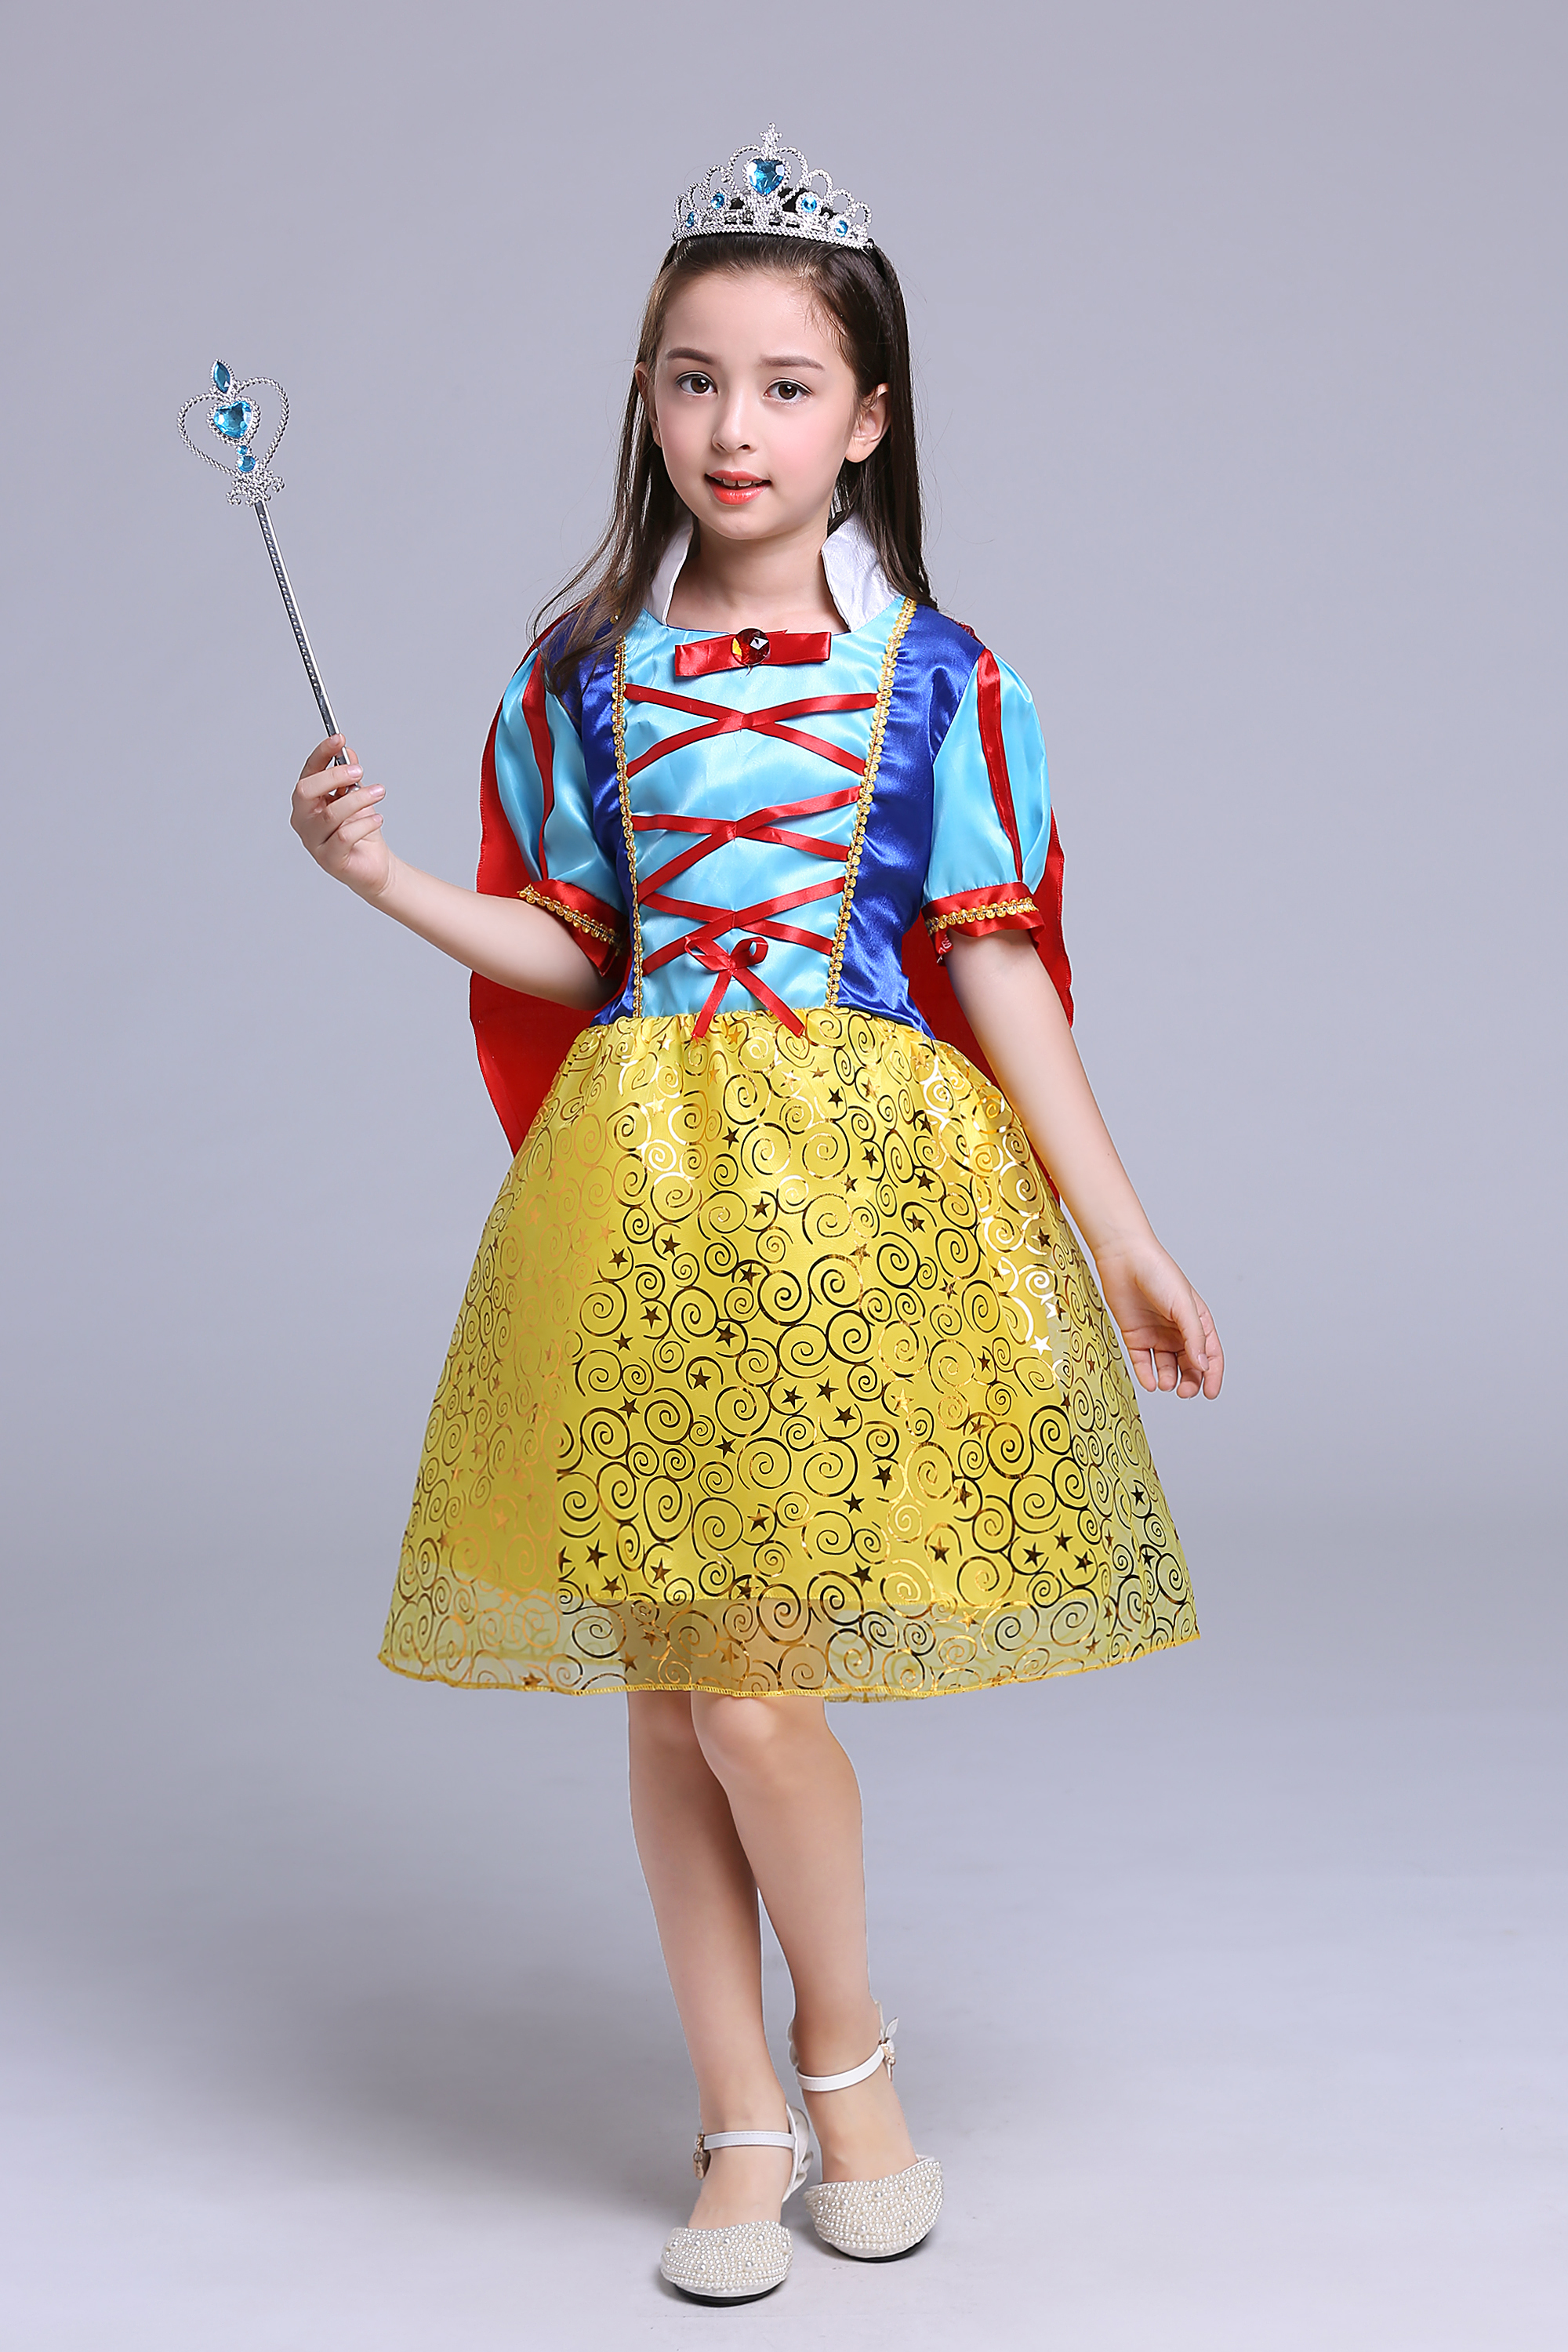 Champagnechildren stage pantomime Snow White And Seven Dwarfs clothing Magic mirror prince queen adult Performance clothes